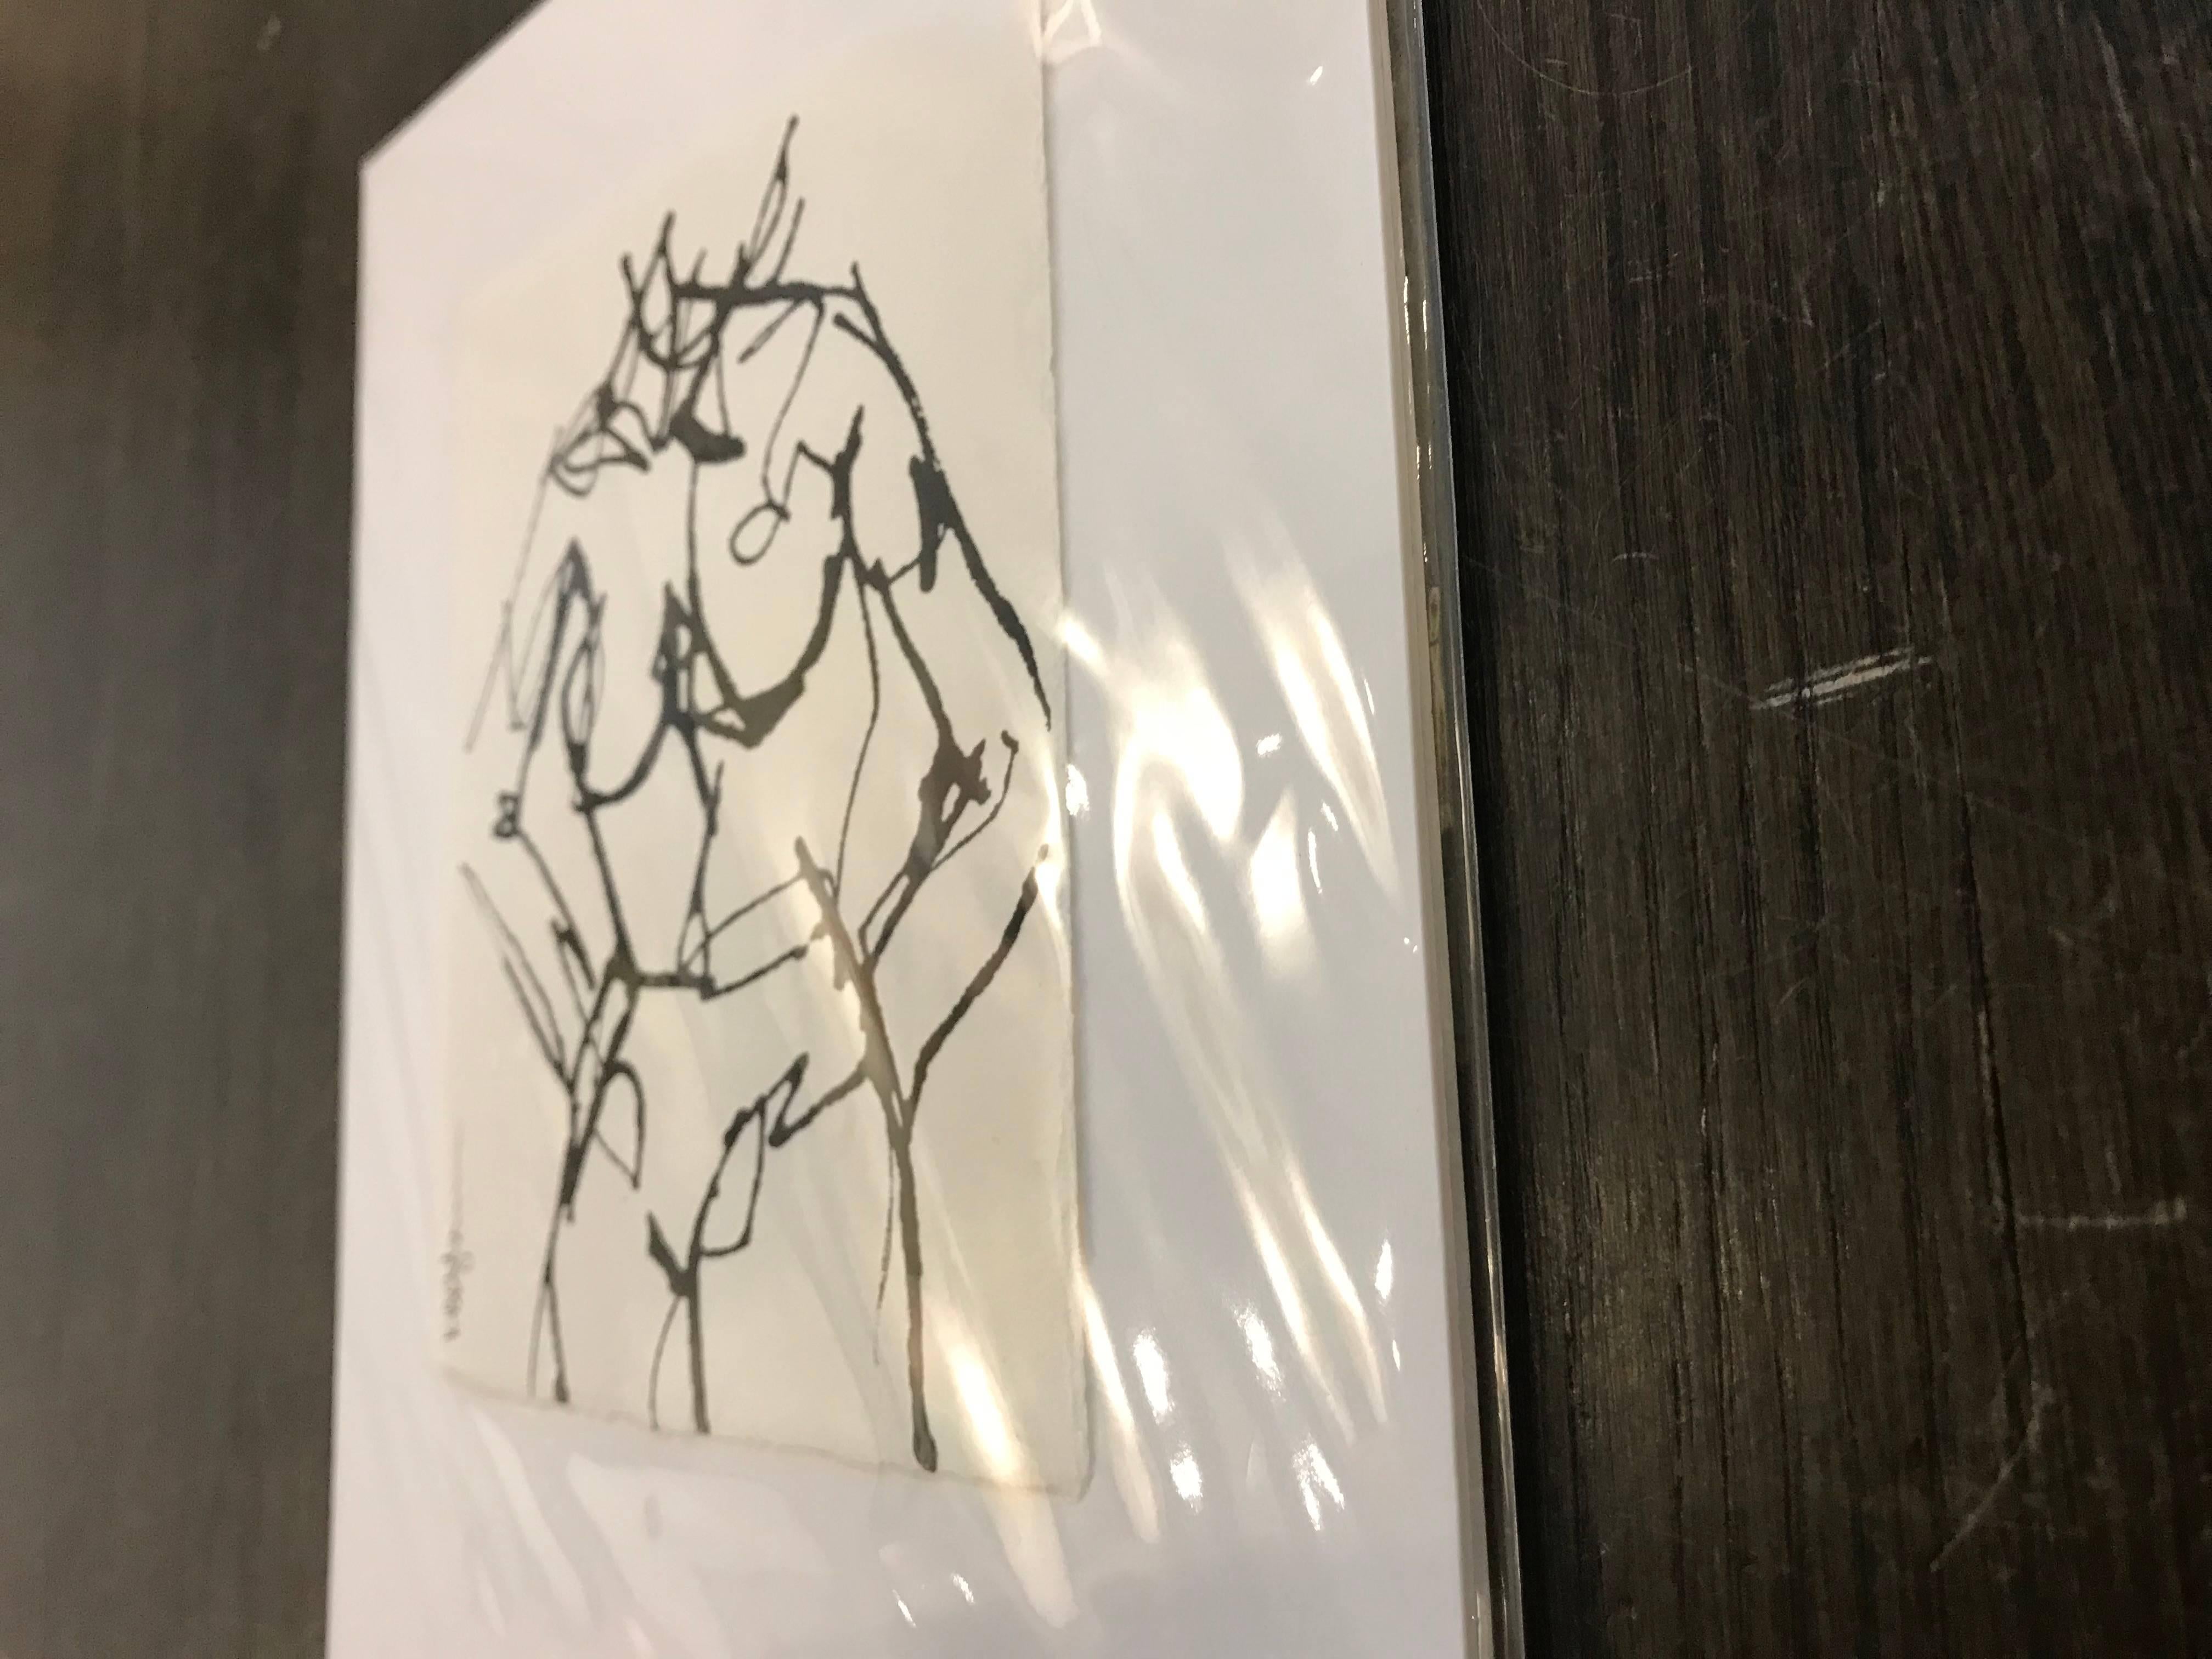 This ink on paper nude figurative depicts a women facing forward with her head slightly looking over her left shoulder, with both arms rested on her hips.  The contour line, the application of paint, the techniques by which art is created all